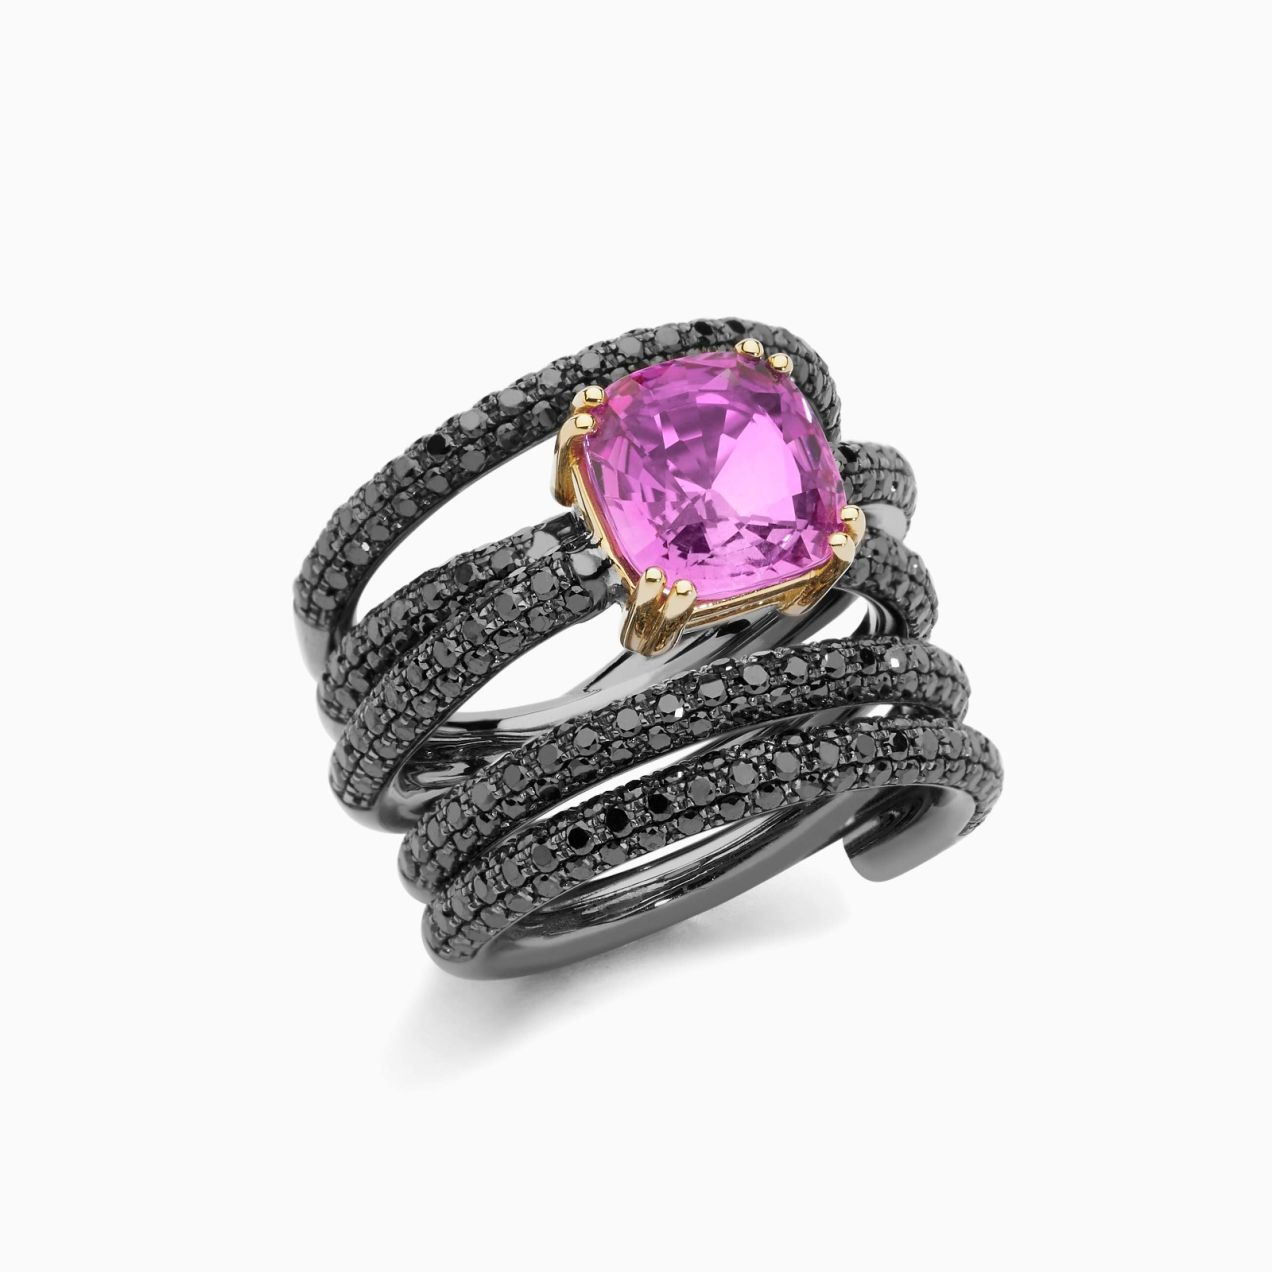 White gold with emeral in the pink diamond and arm with black diamonds solitaire ring